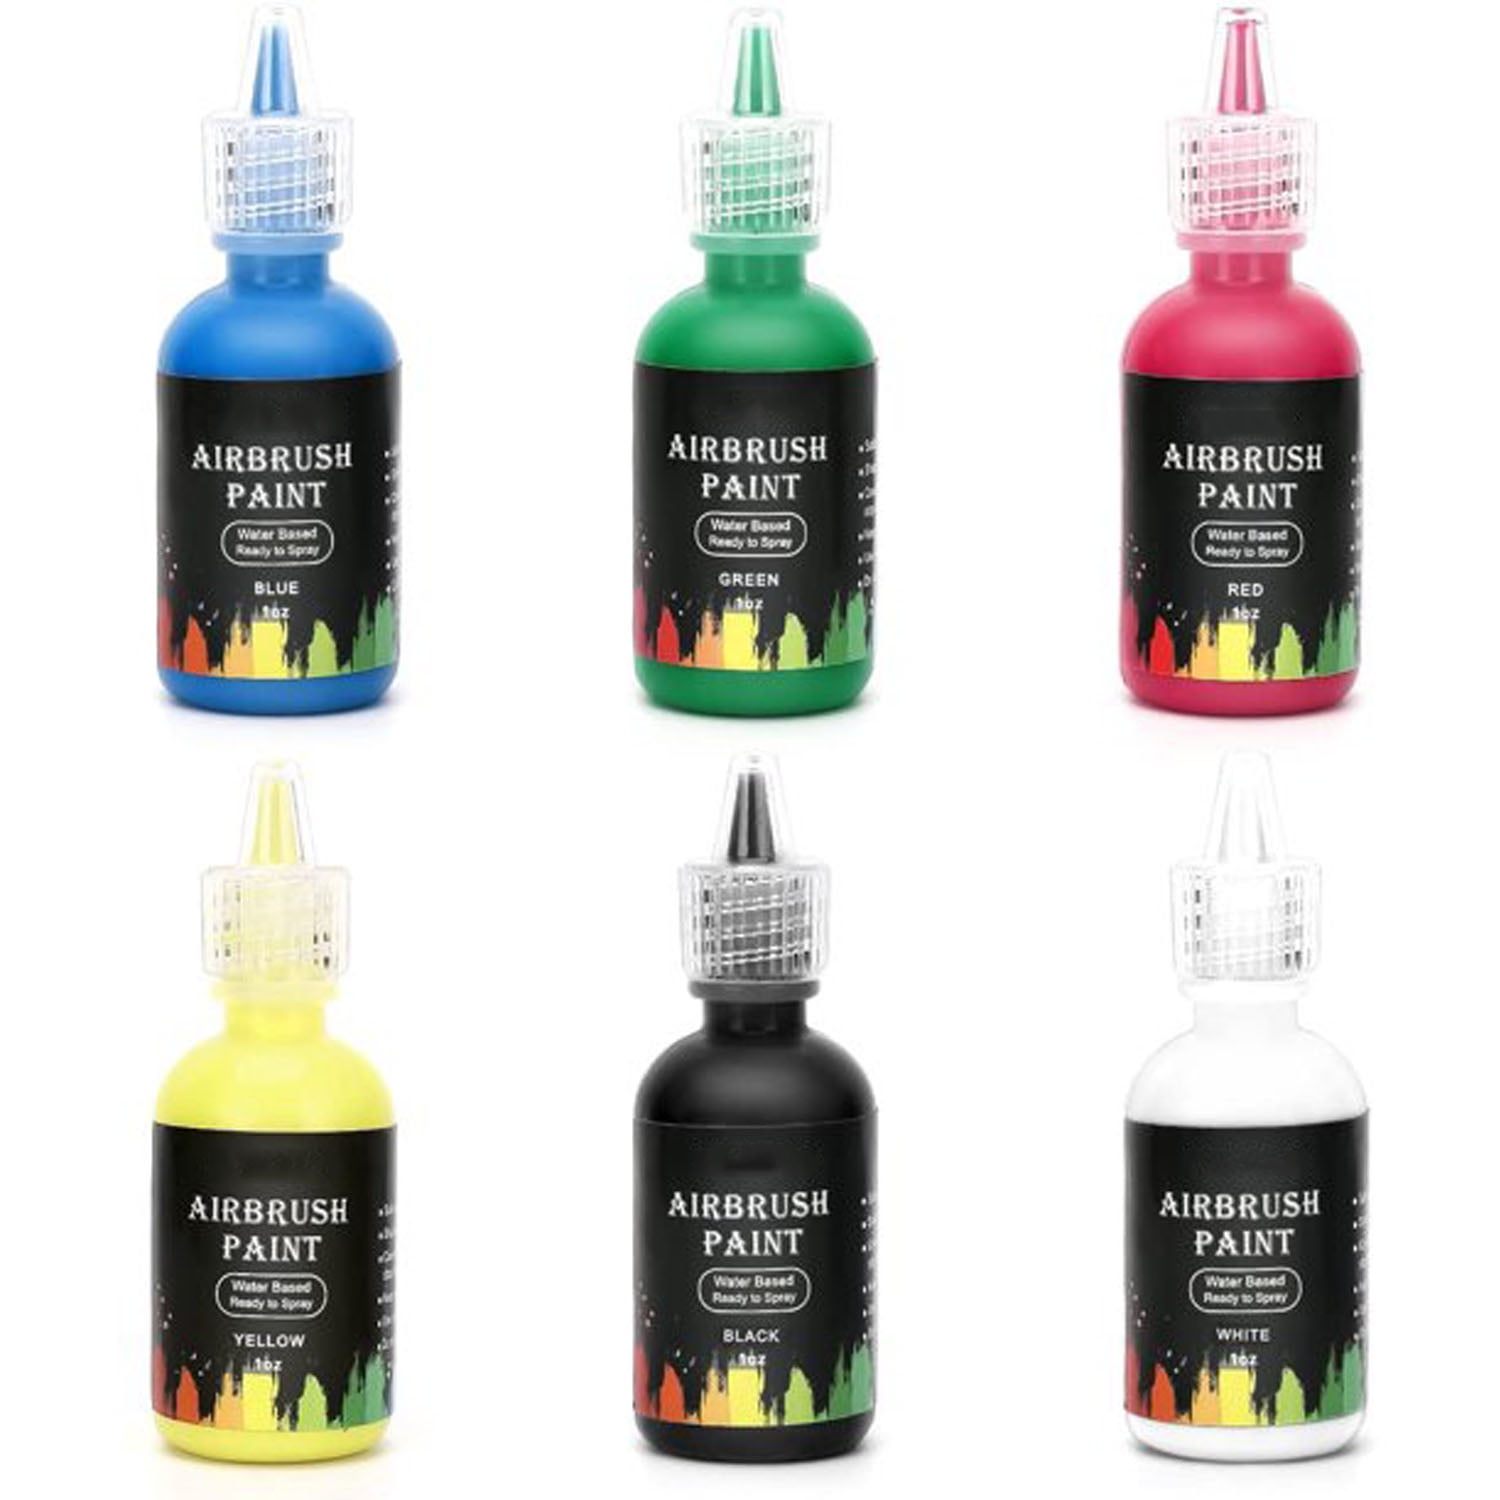 imyyds Airbrush Paint, 6 Color Acrylic Airbrush Paint Set, Water Based  Read-to-Spray Air Brush Painting Set, Airbrush Spray Paint Kit for Papers